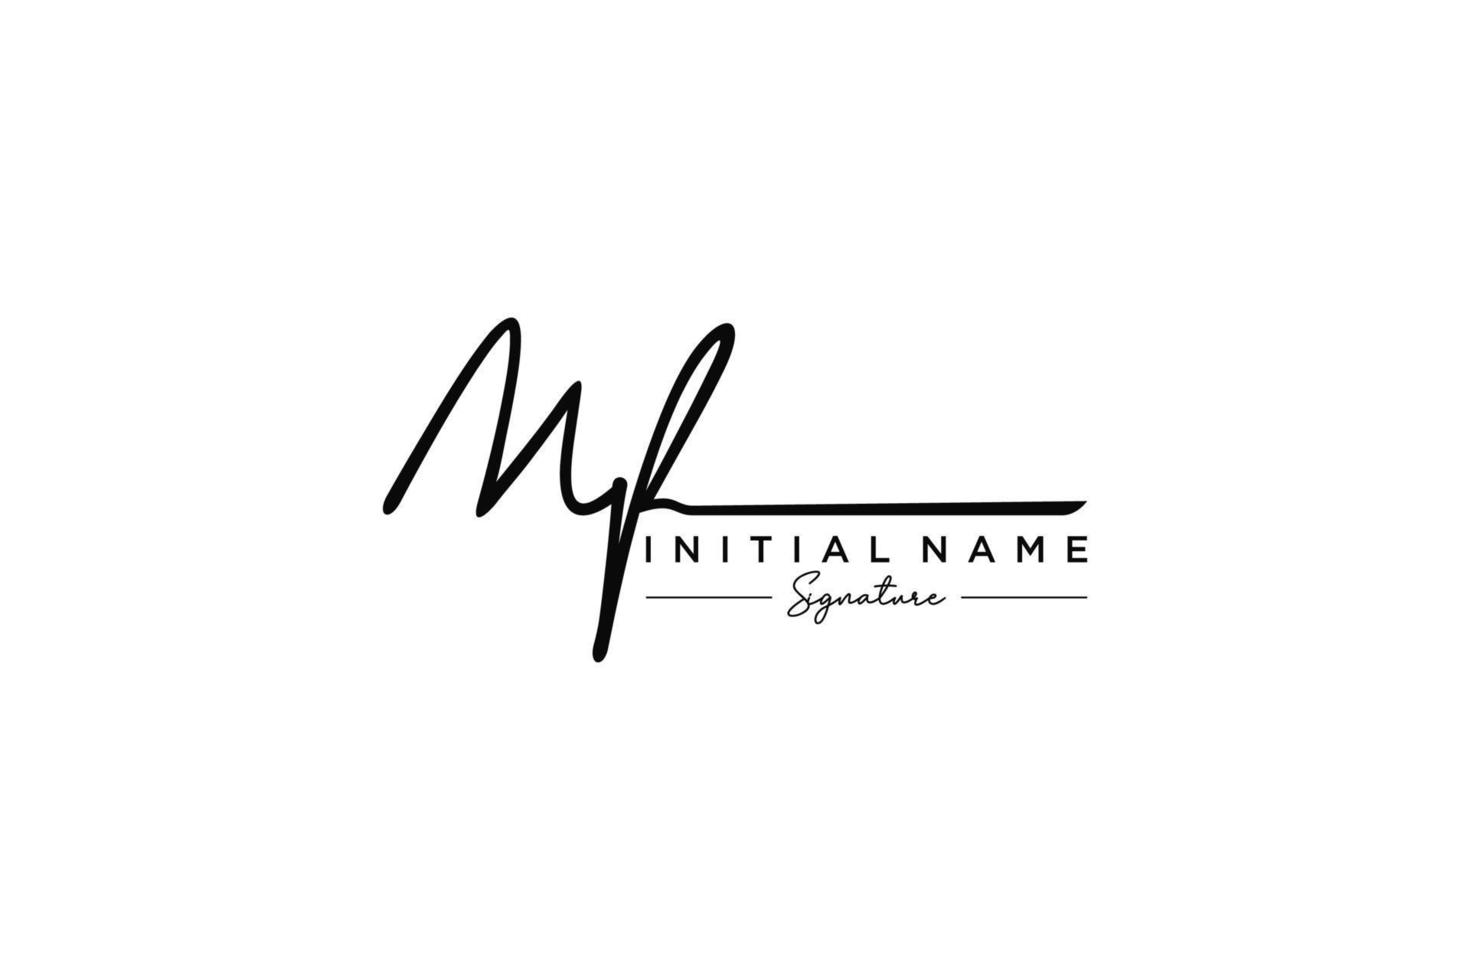 Initial MF signature logo template vector. Hand drawn Calligraphy lettering Vector illustration.